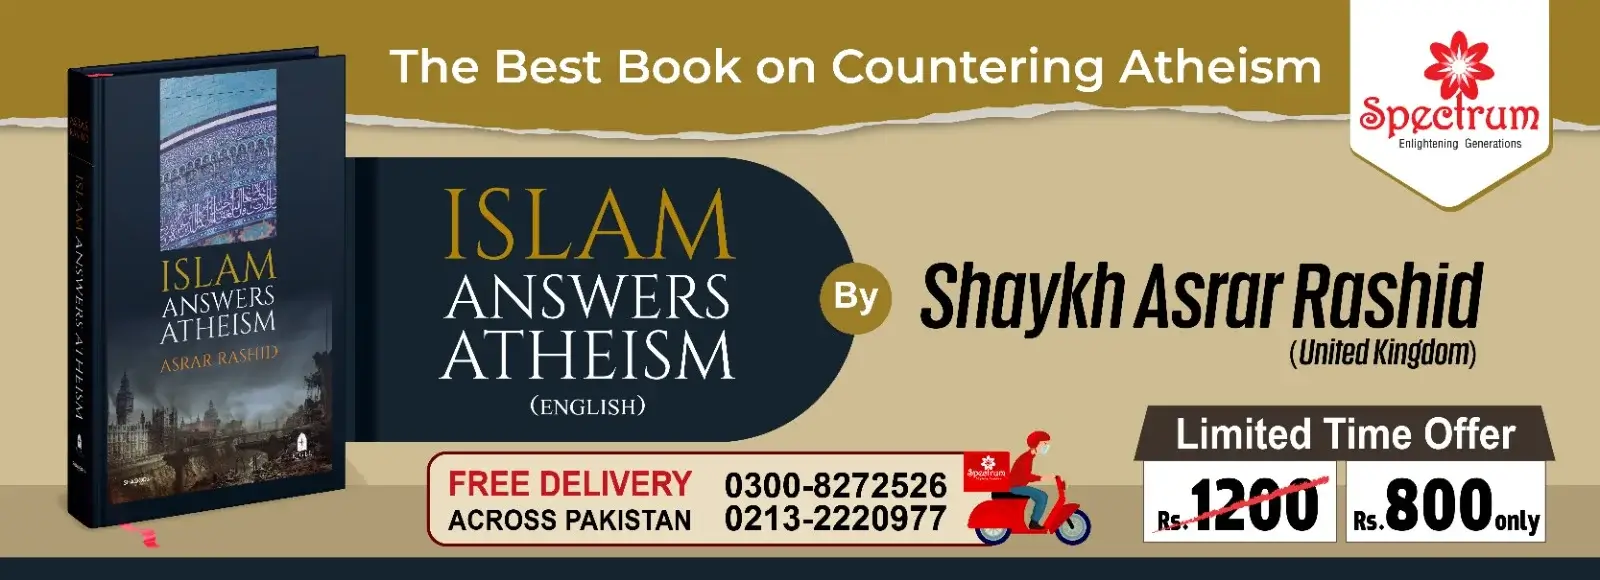 Islam Answers Aethism (Web banner)